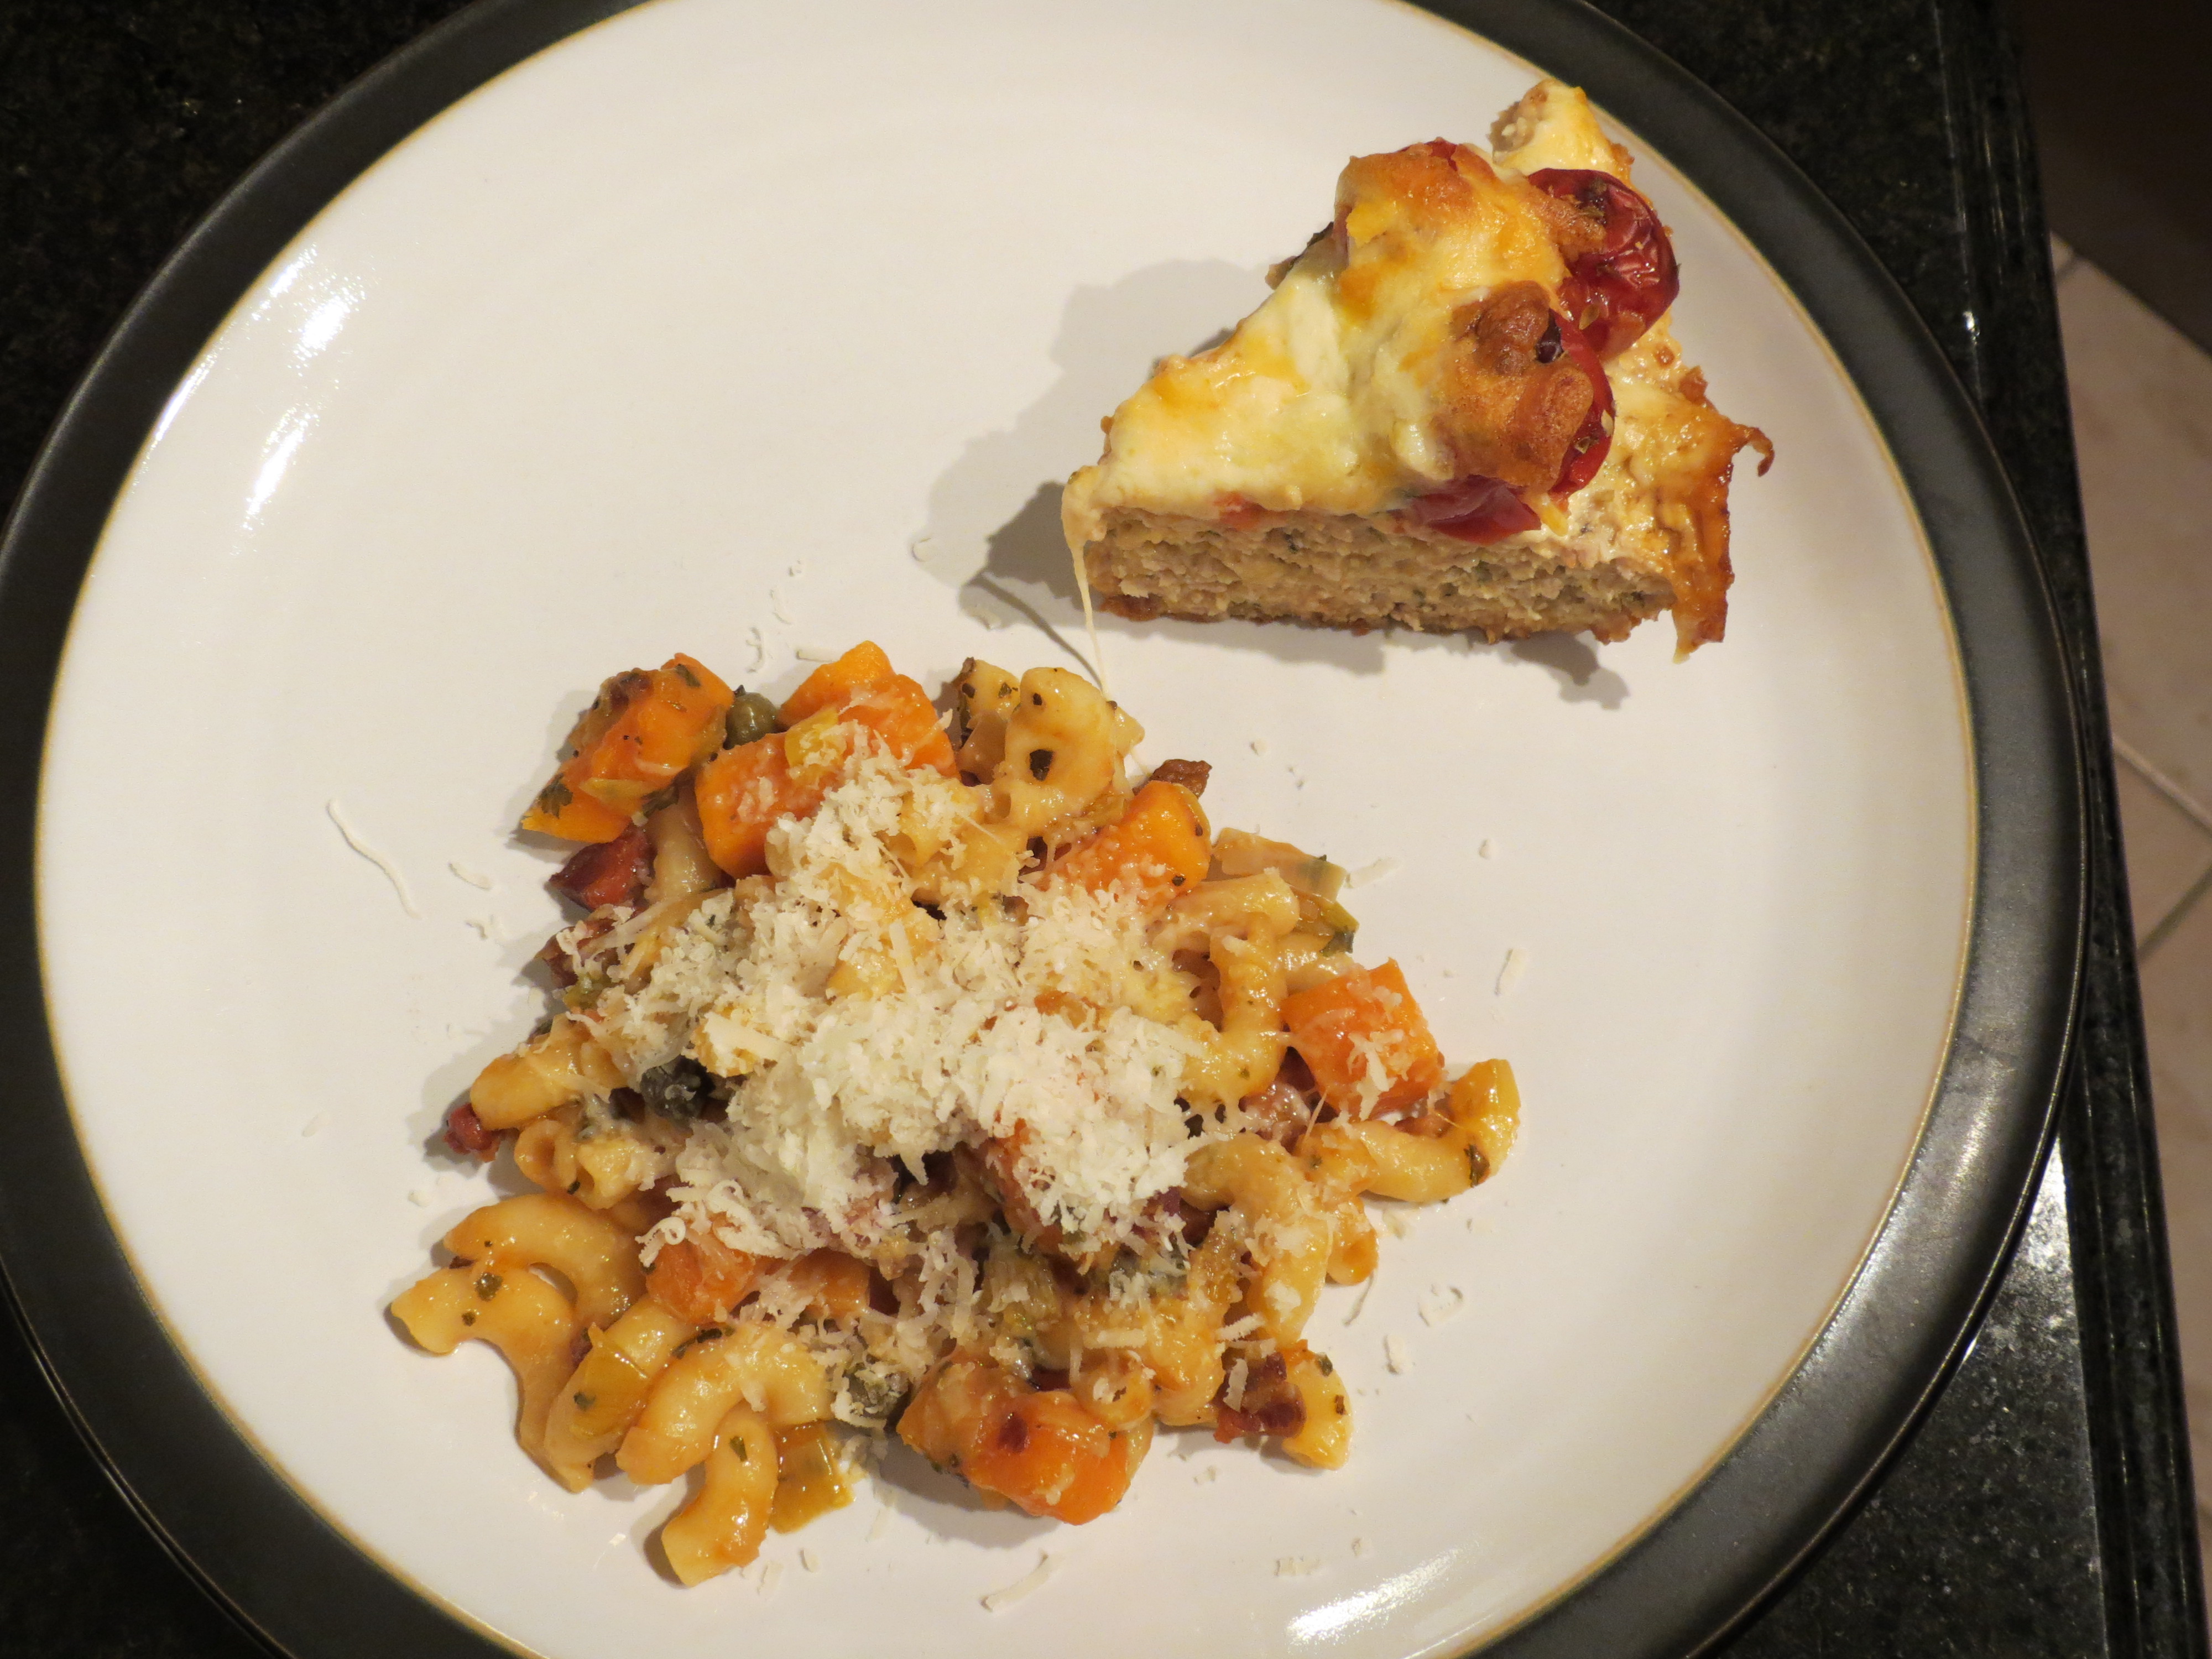 An Italian Feast – Part Two (Pipettes with Sweet Potatoes, Parsley and Capers)